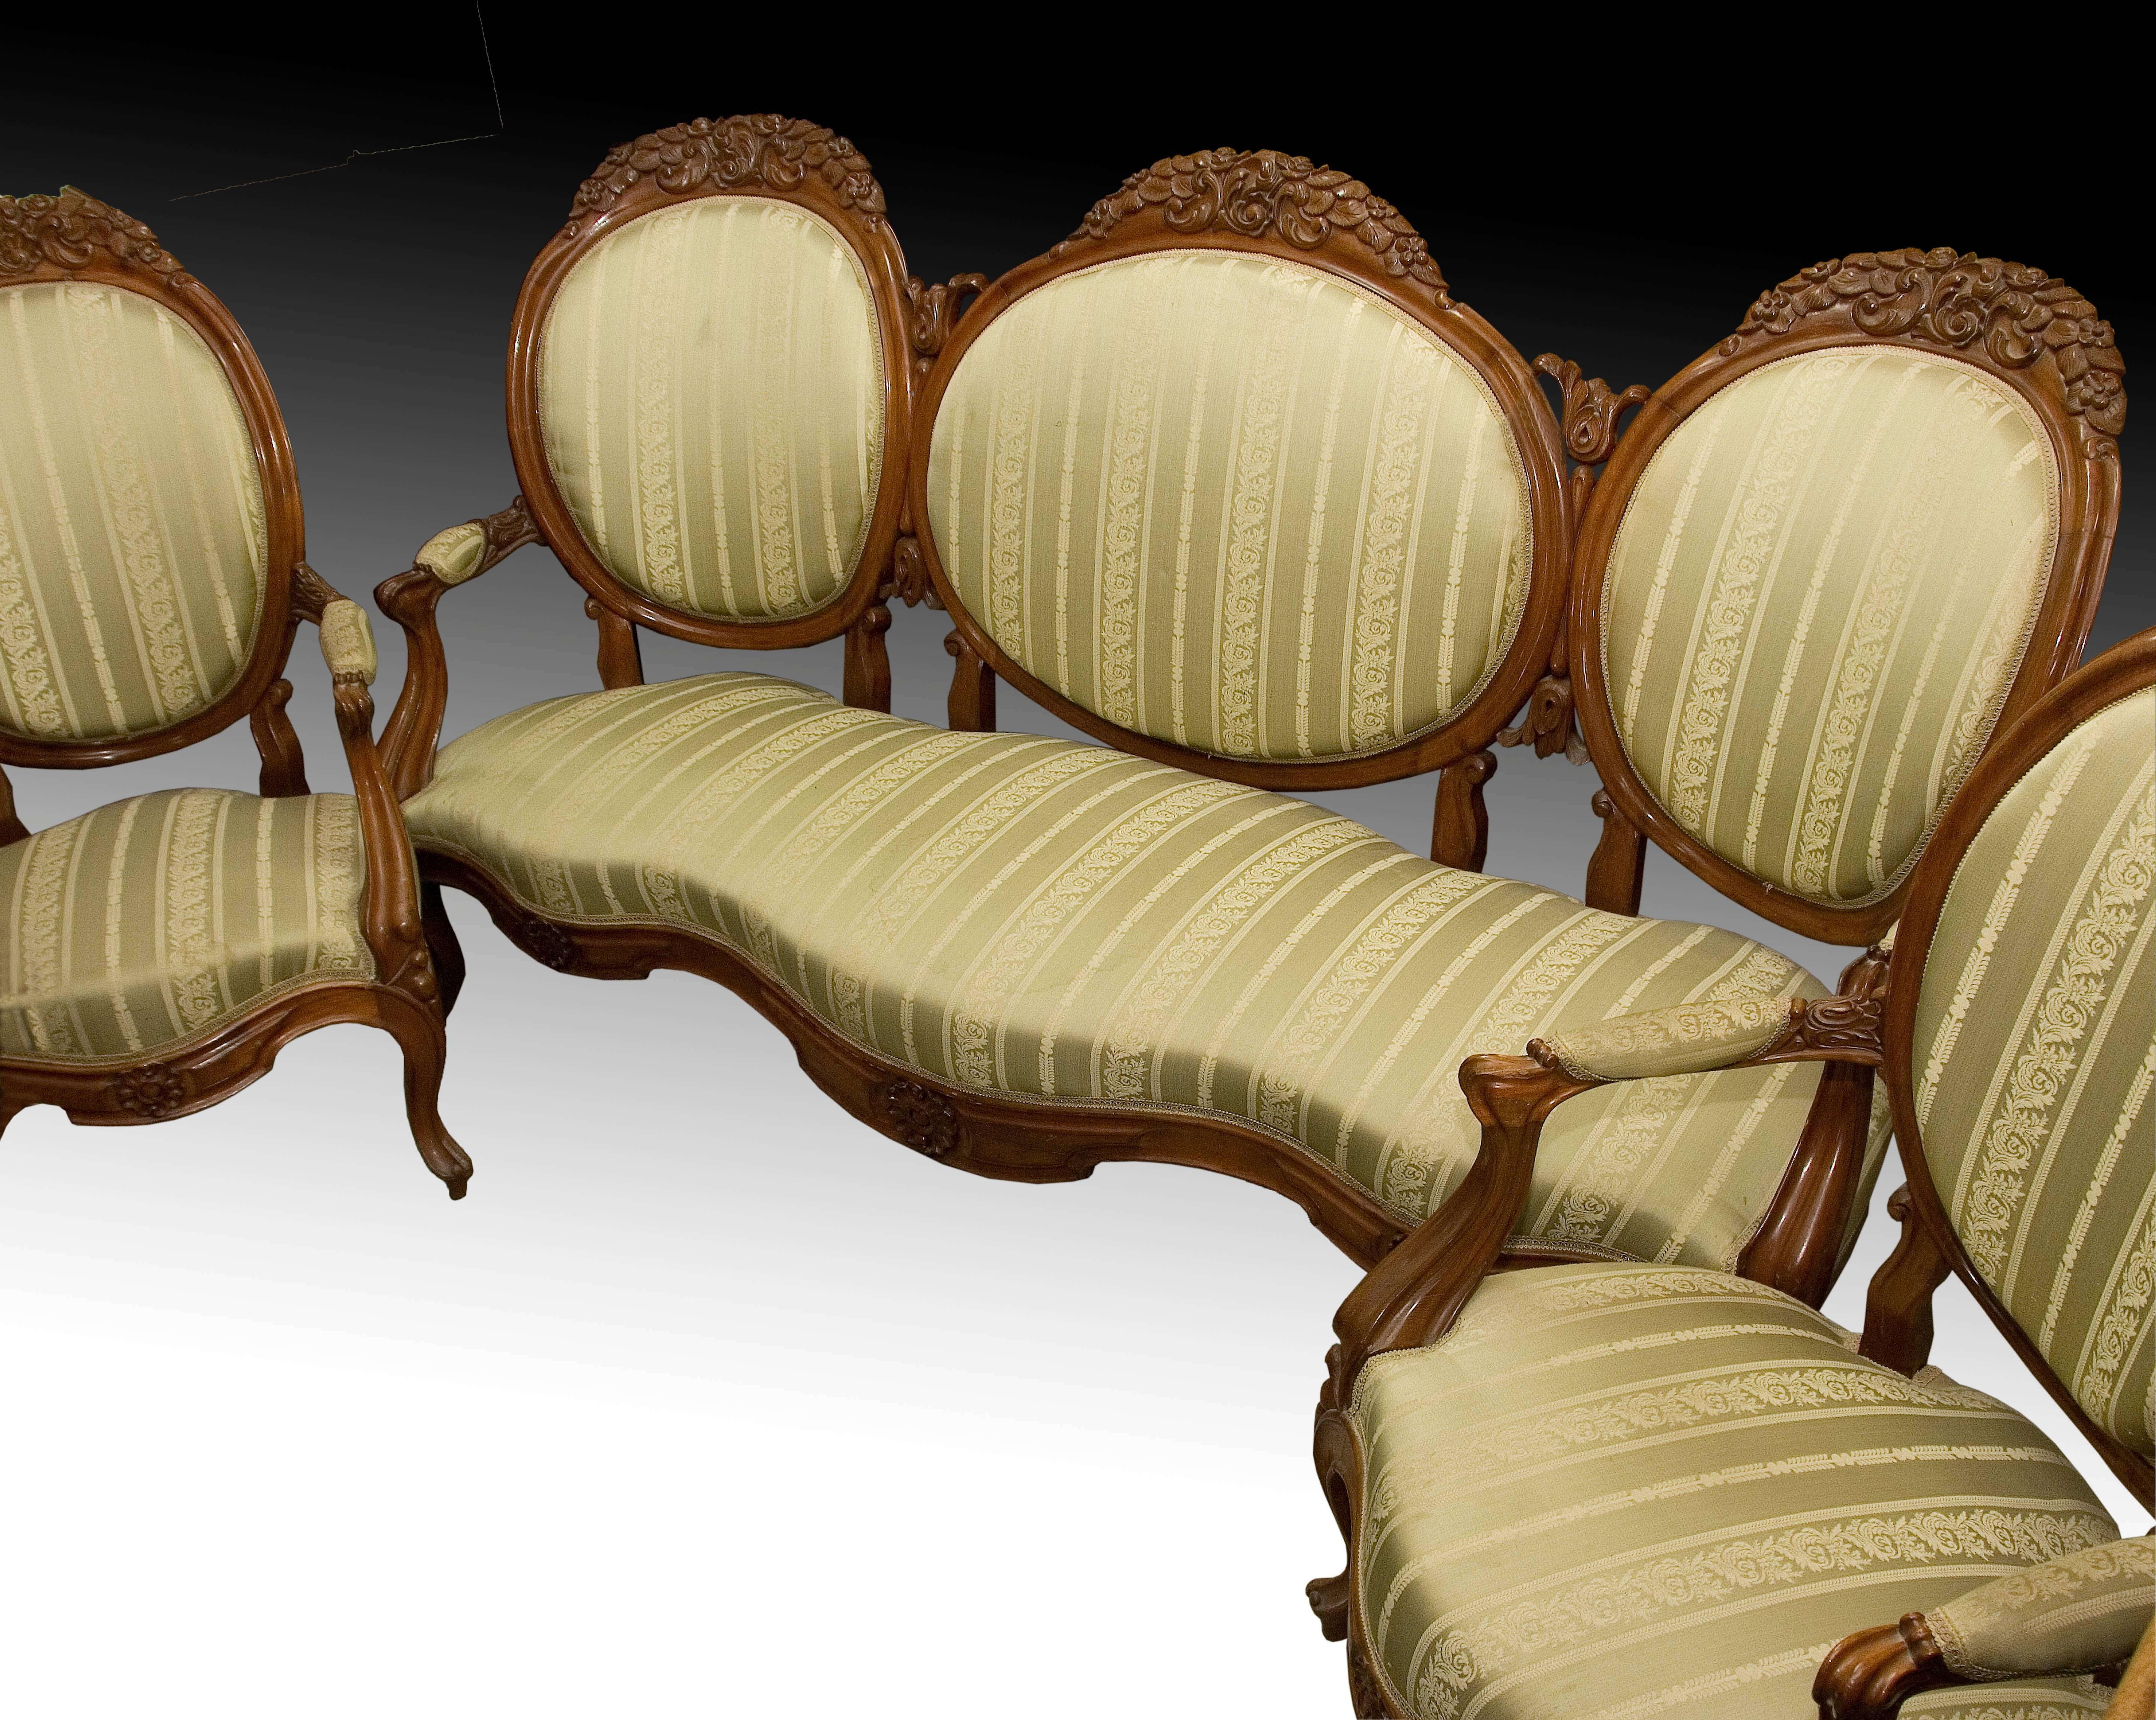 Elizabethan triplet in mahogany wood, 19th century. Tresillo with carved floral motifs, four cabriolet legs, curved and partially upholstered short arms, and 